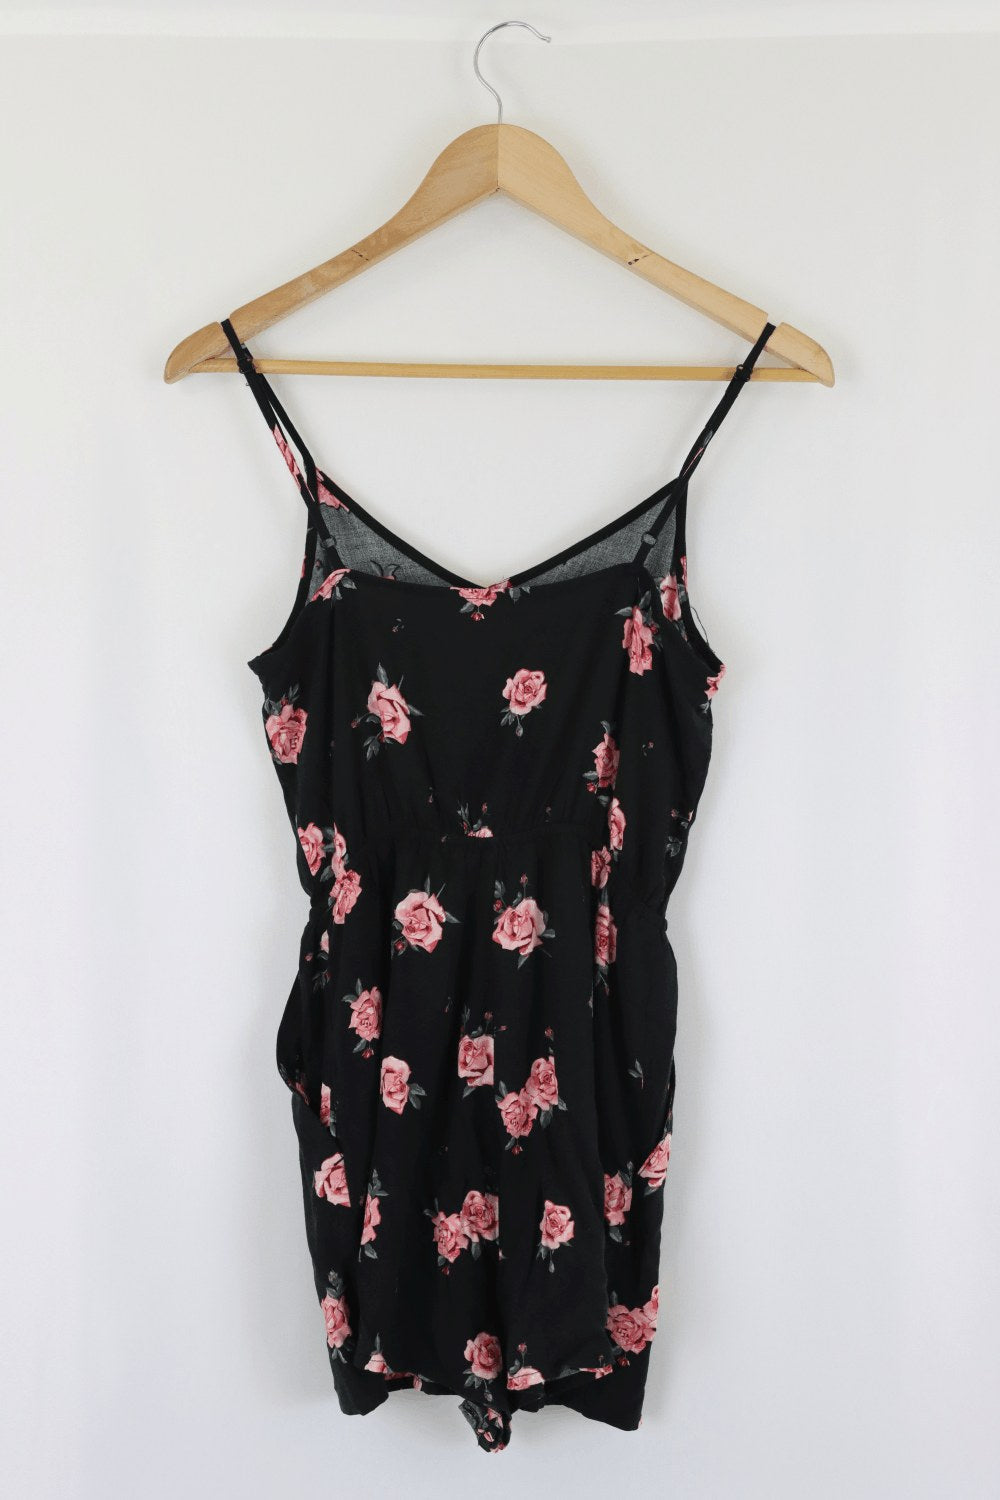 H&amp;M Floral Black And White Jumpsuit 6